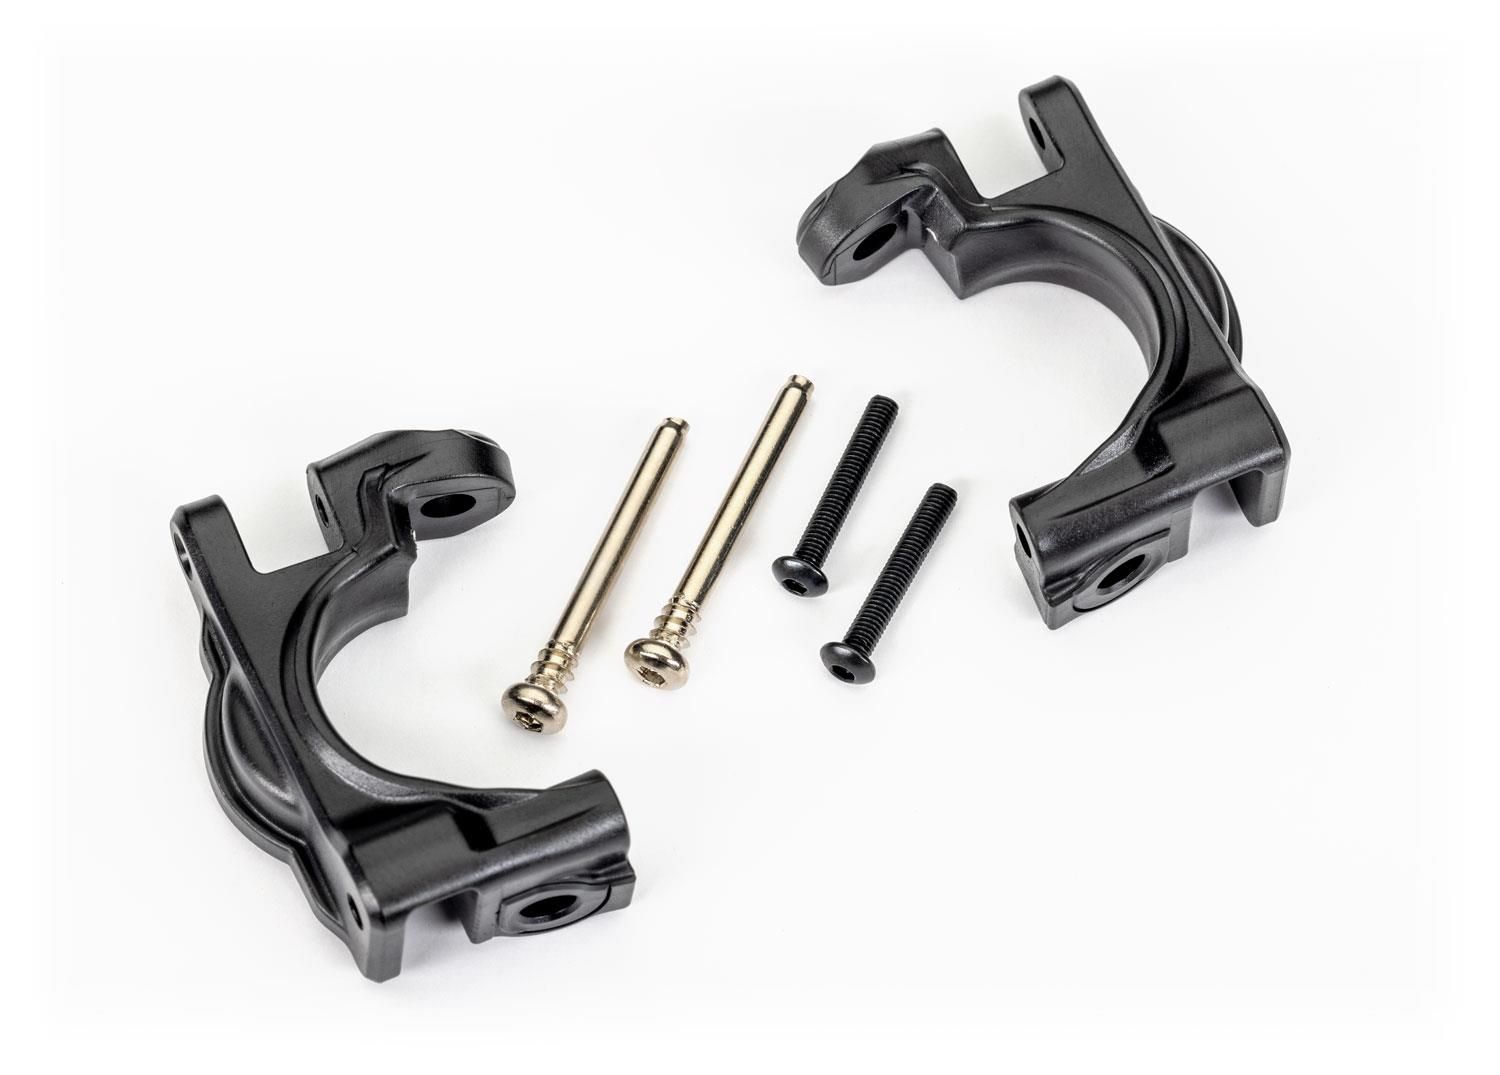 Traxxas - Caster Blocks Left/Right (for use with #9080 upgrade kit) - Black (TRX-9032)